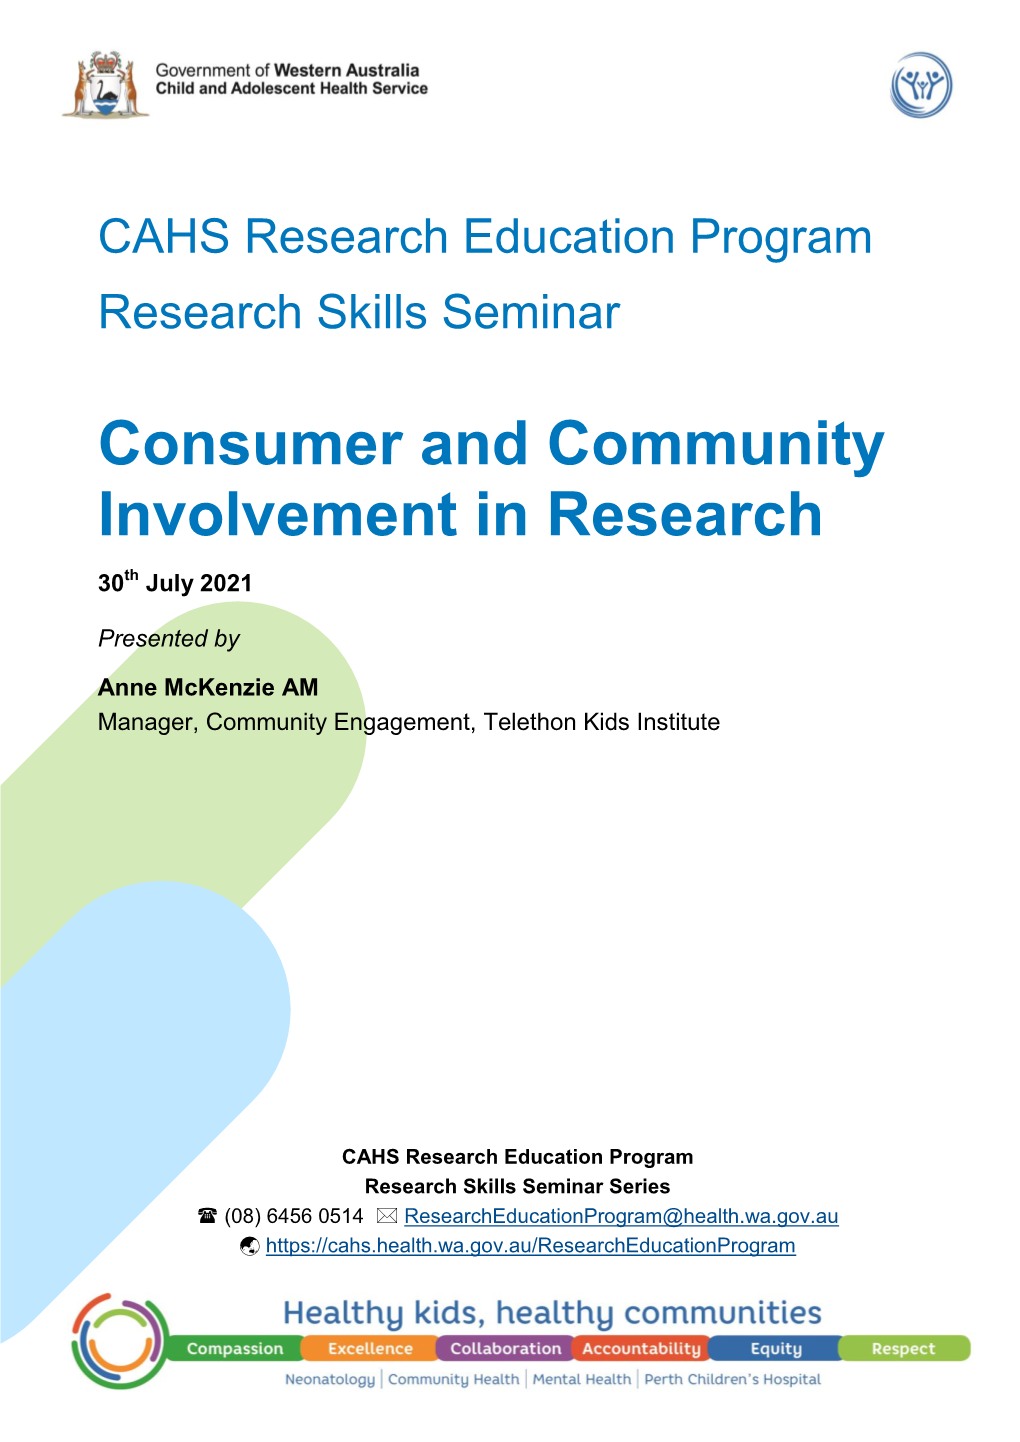 Consumer and Community Involvement in Research